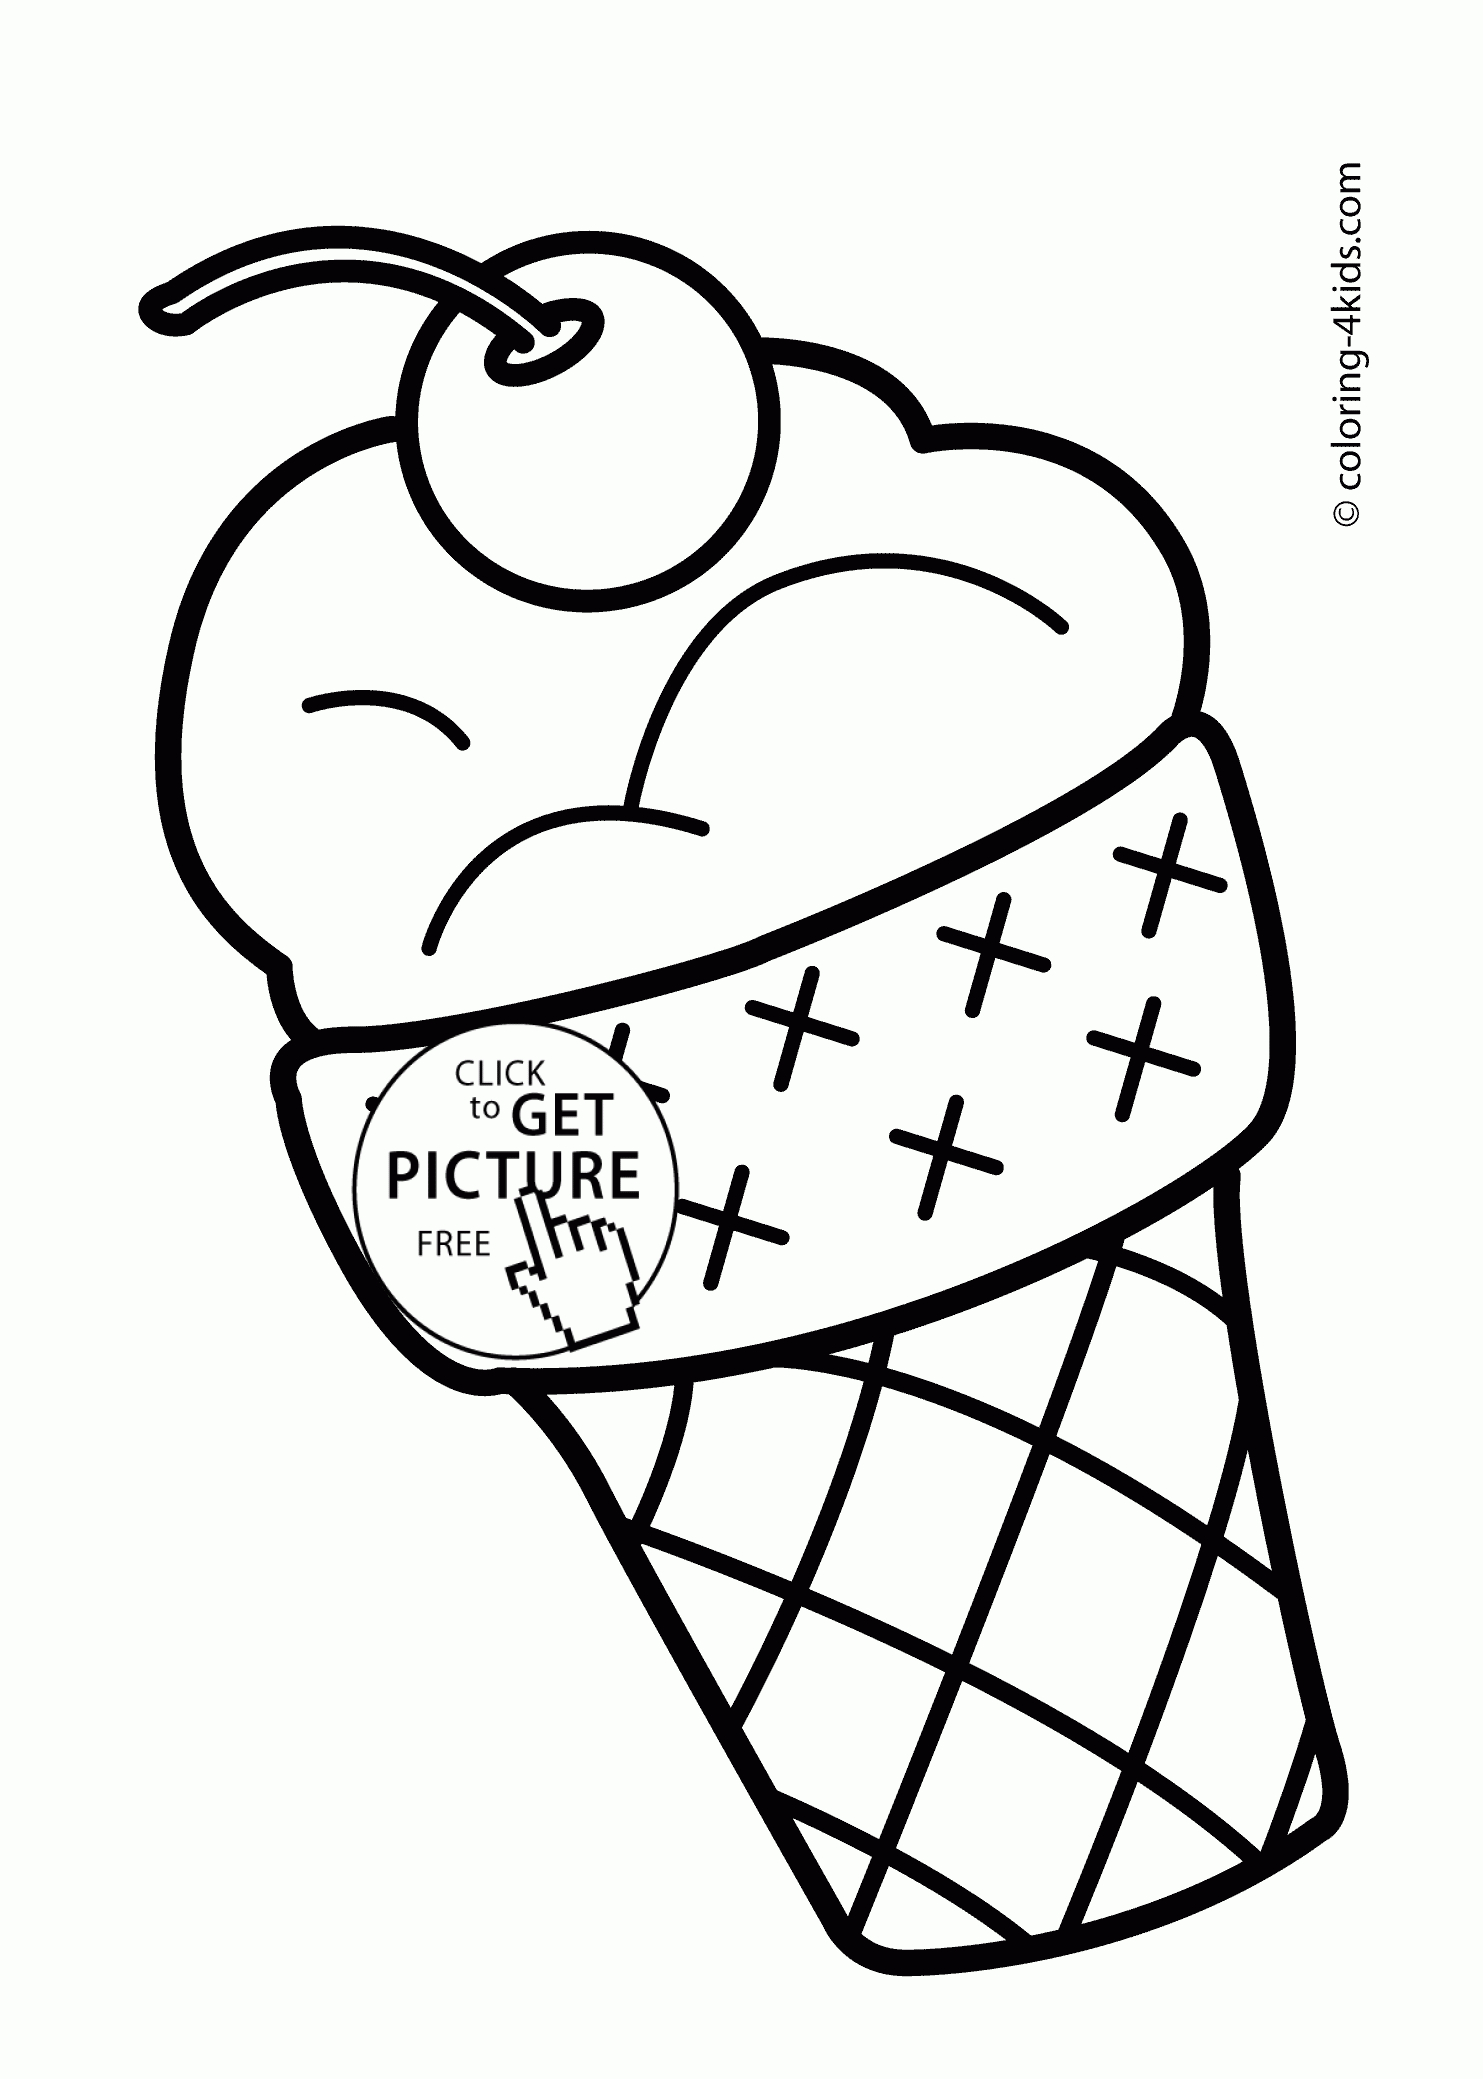 Summer Coloring Pages With Ice Cream For Kids, Seasons Coloring - Free Printable Summer Coloring Pages